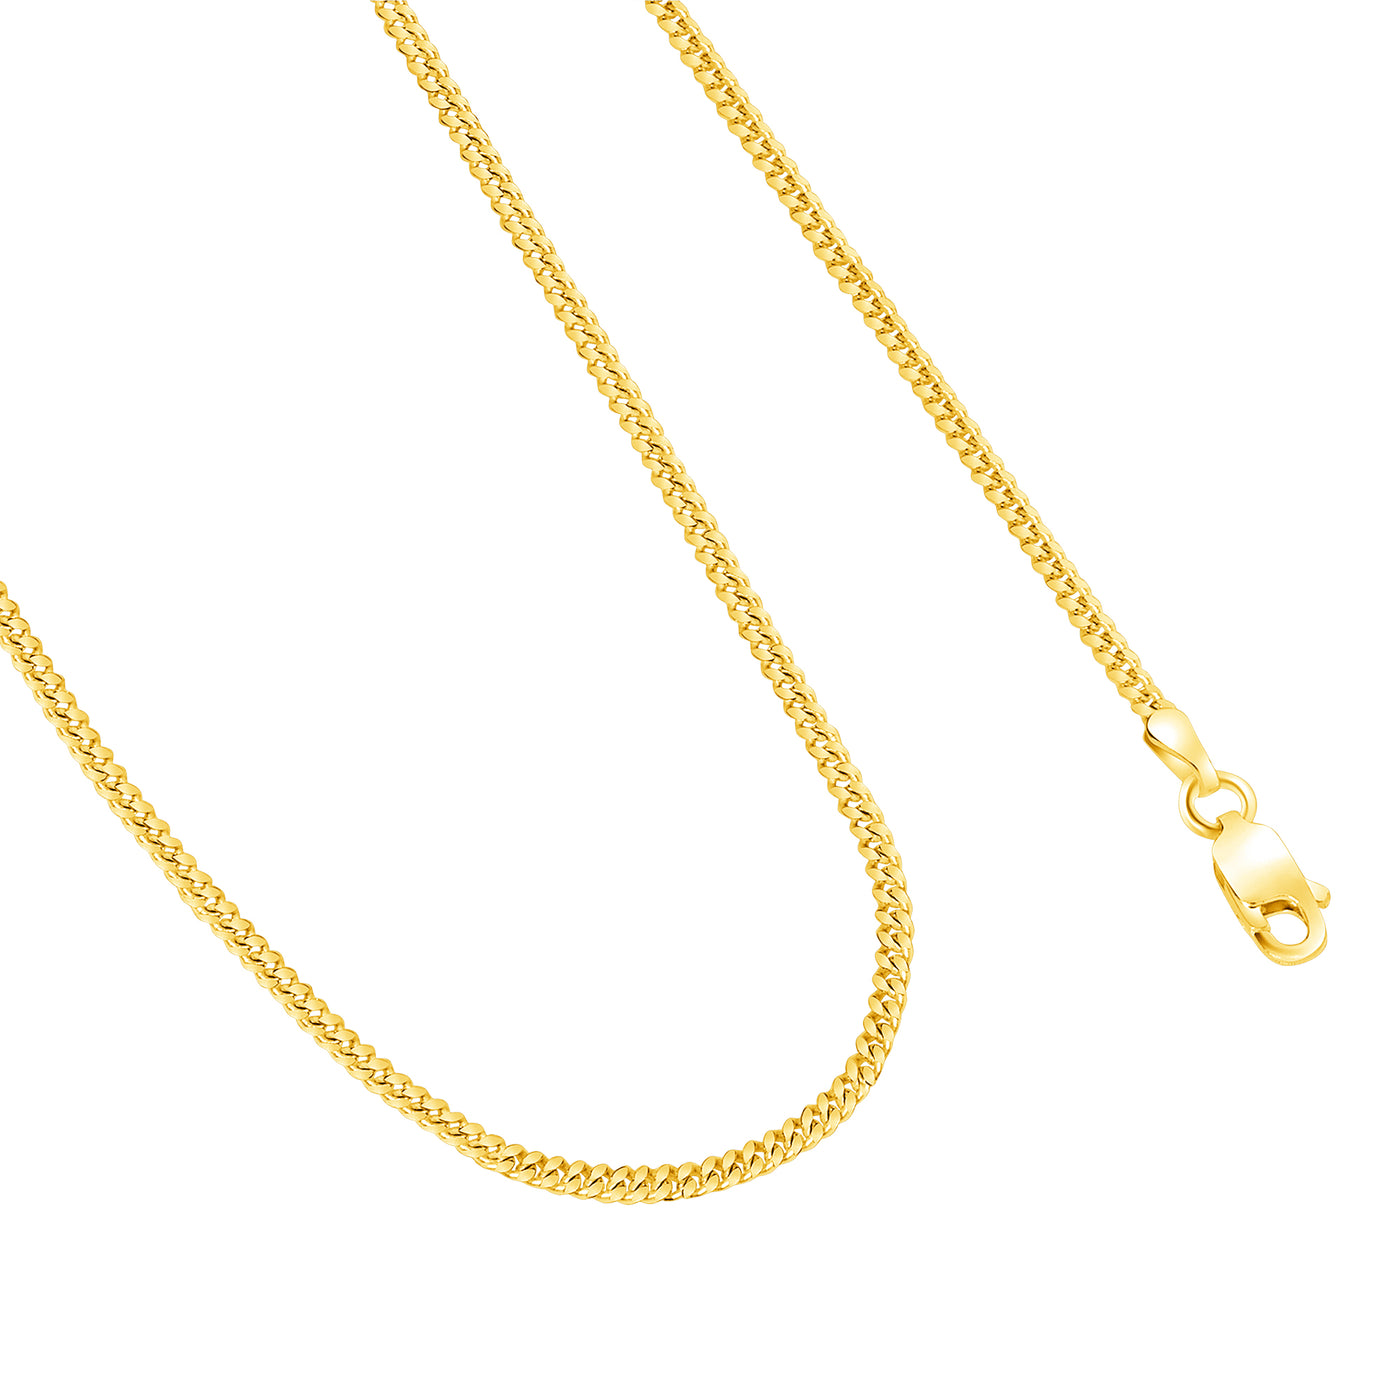 Solid 14K Yellow Gold 2.7 mm, 4 mm Miami Cuban Link Chain Necklace 16"-26"